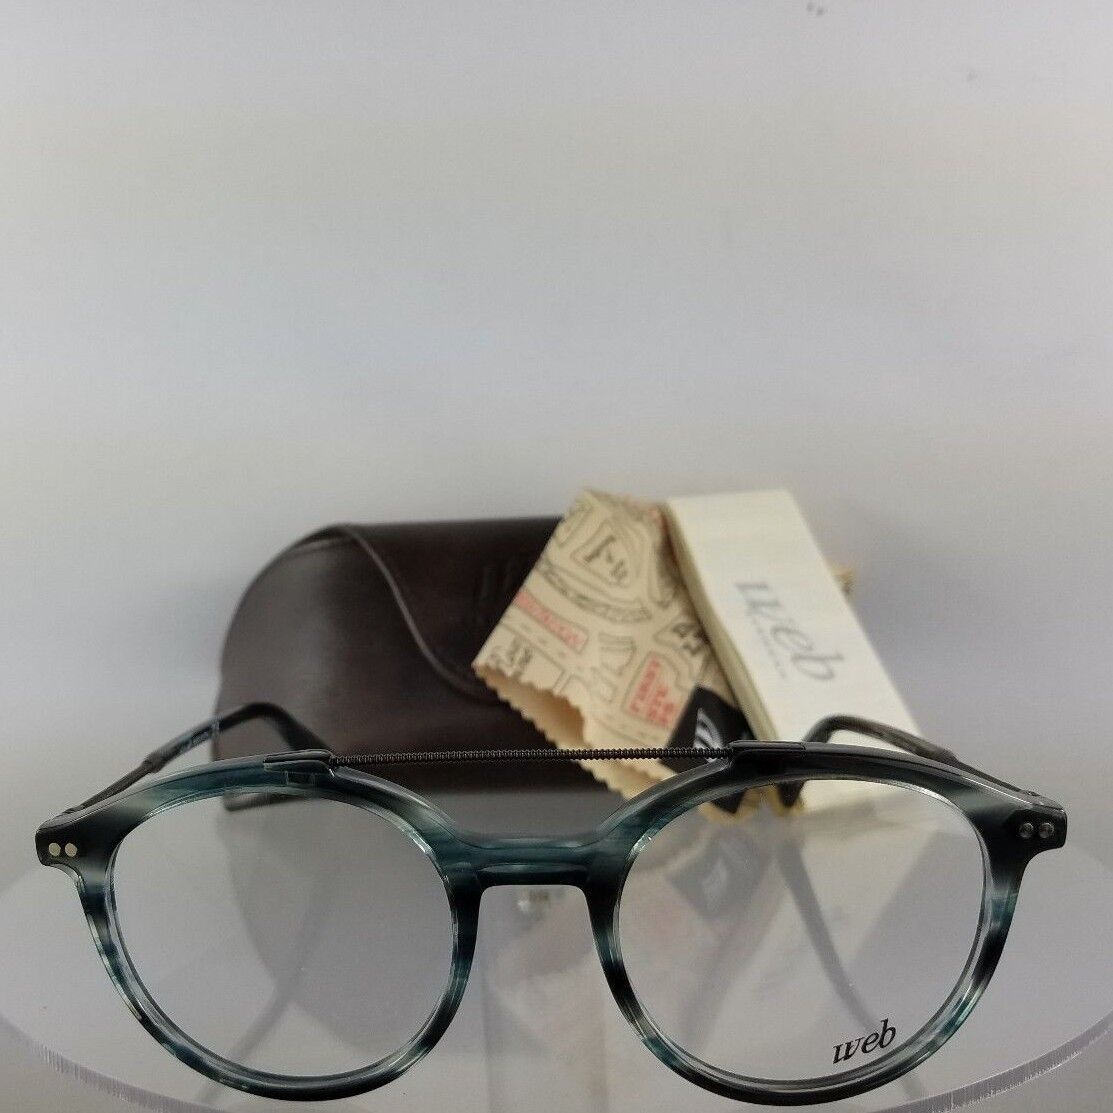 Brand New Authentic Web Eyeglasses WE 5204 Col. 092 Blue Tortoise Clear WE5204